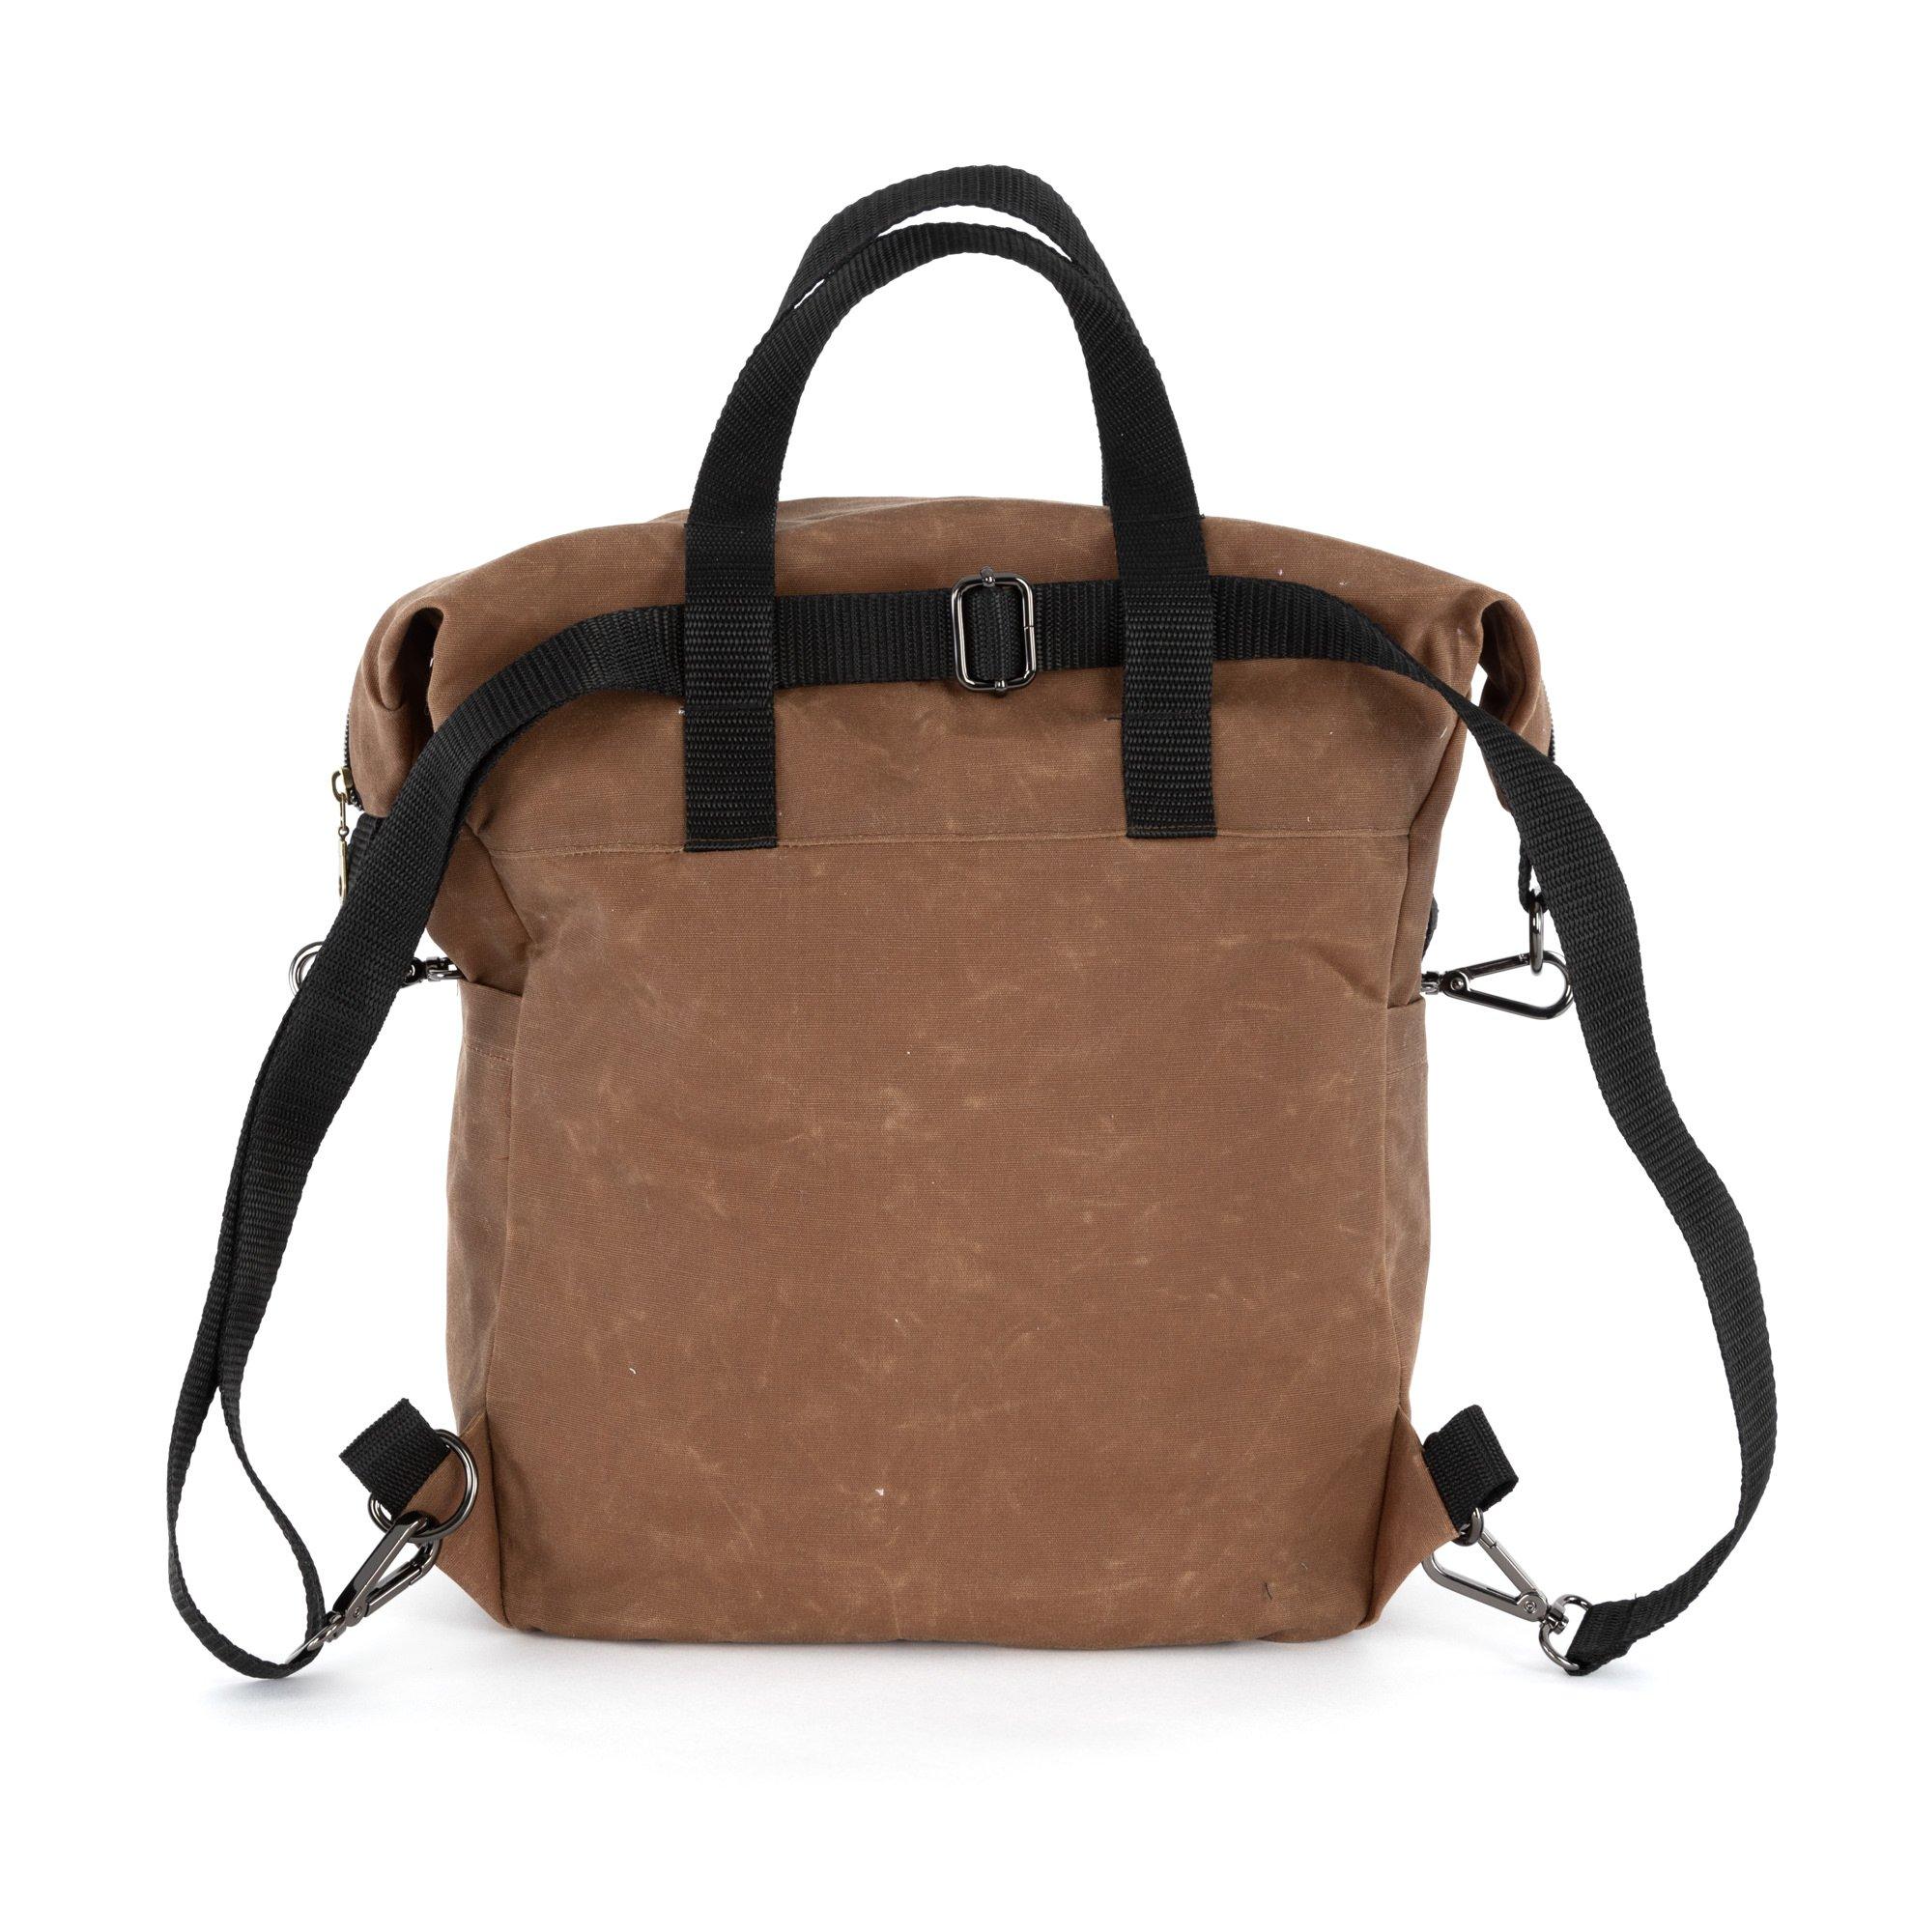 Convertible waxed canvas tote bag that you can use as a backpack